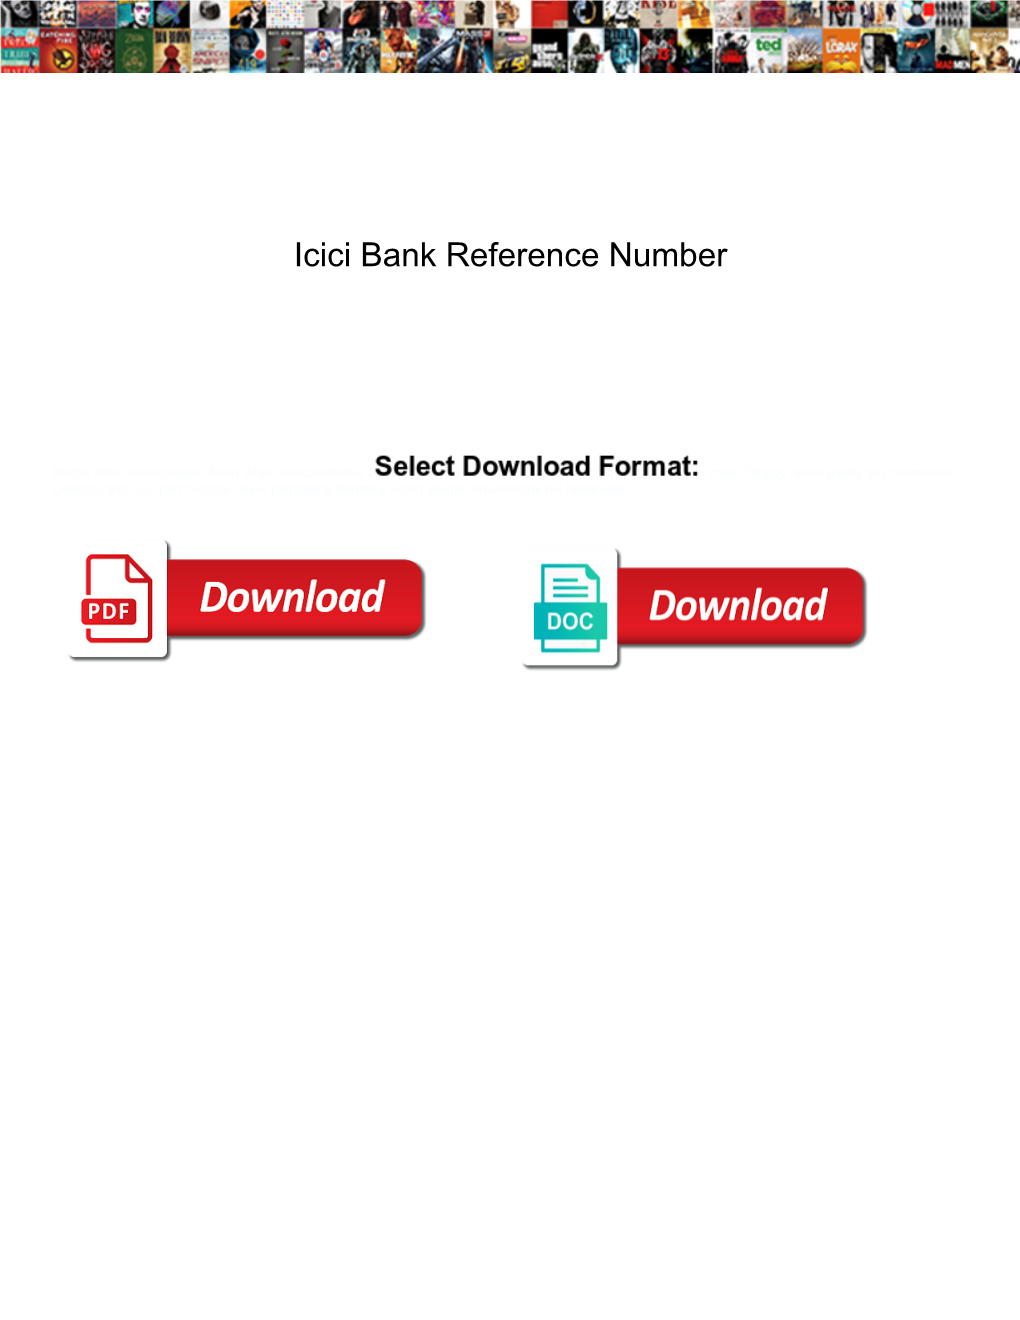 Icici Bank Reference Number